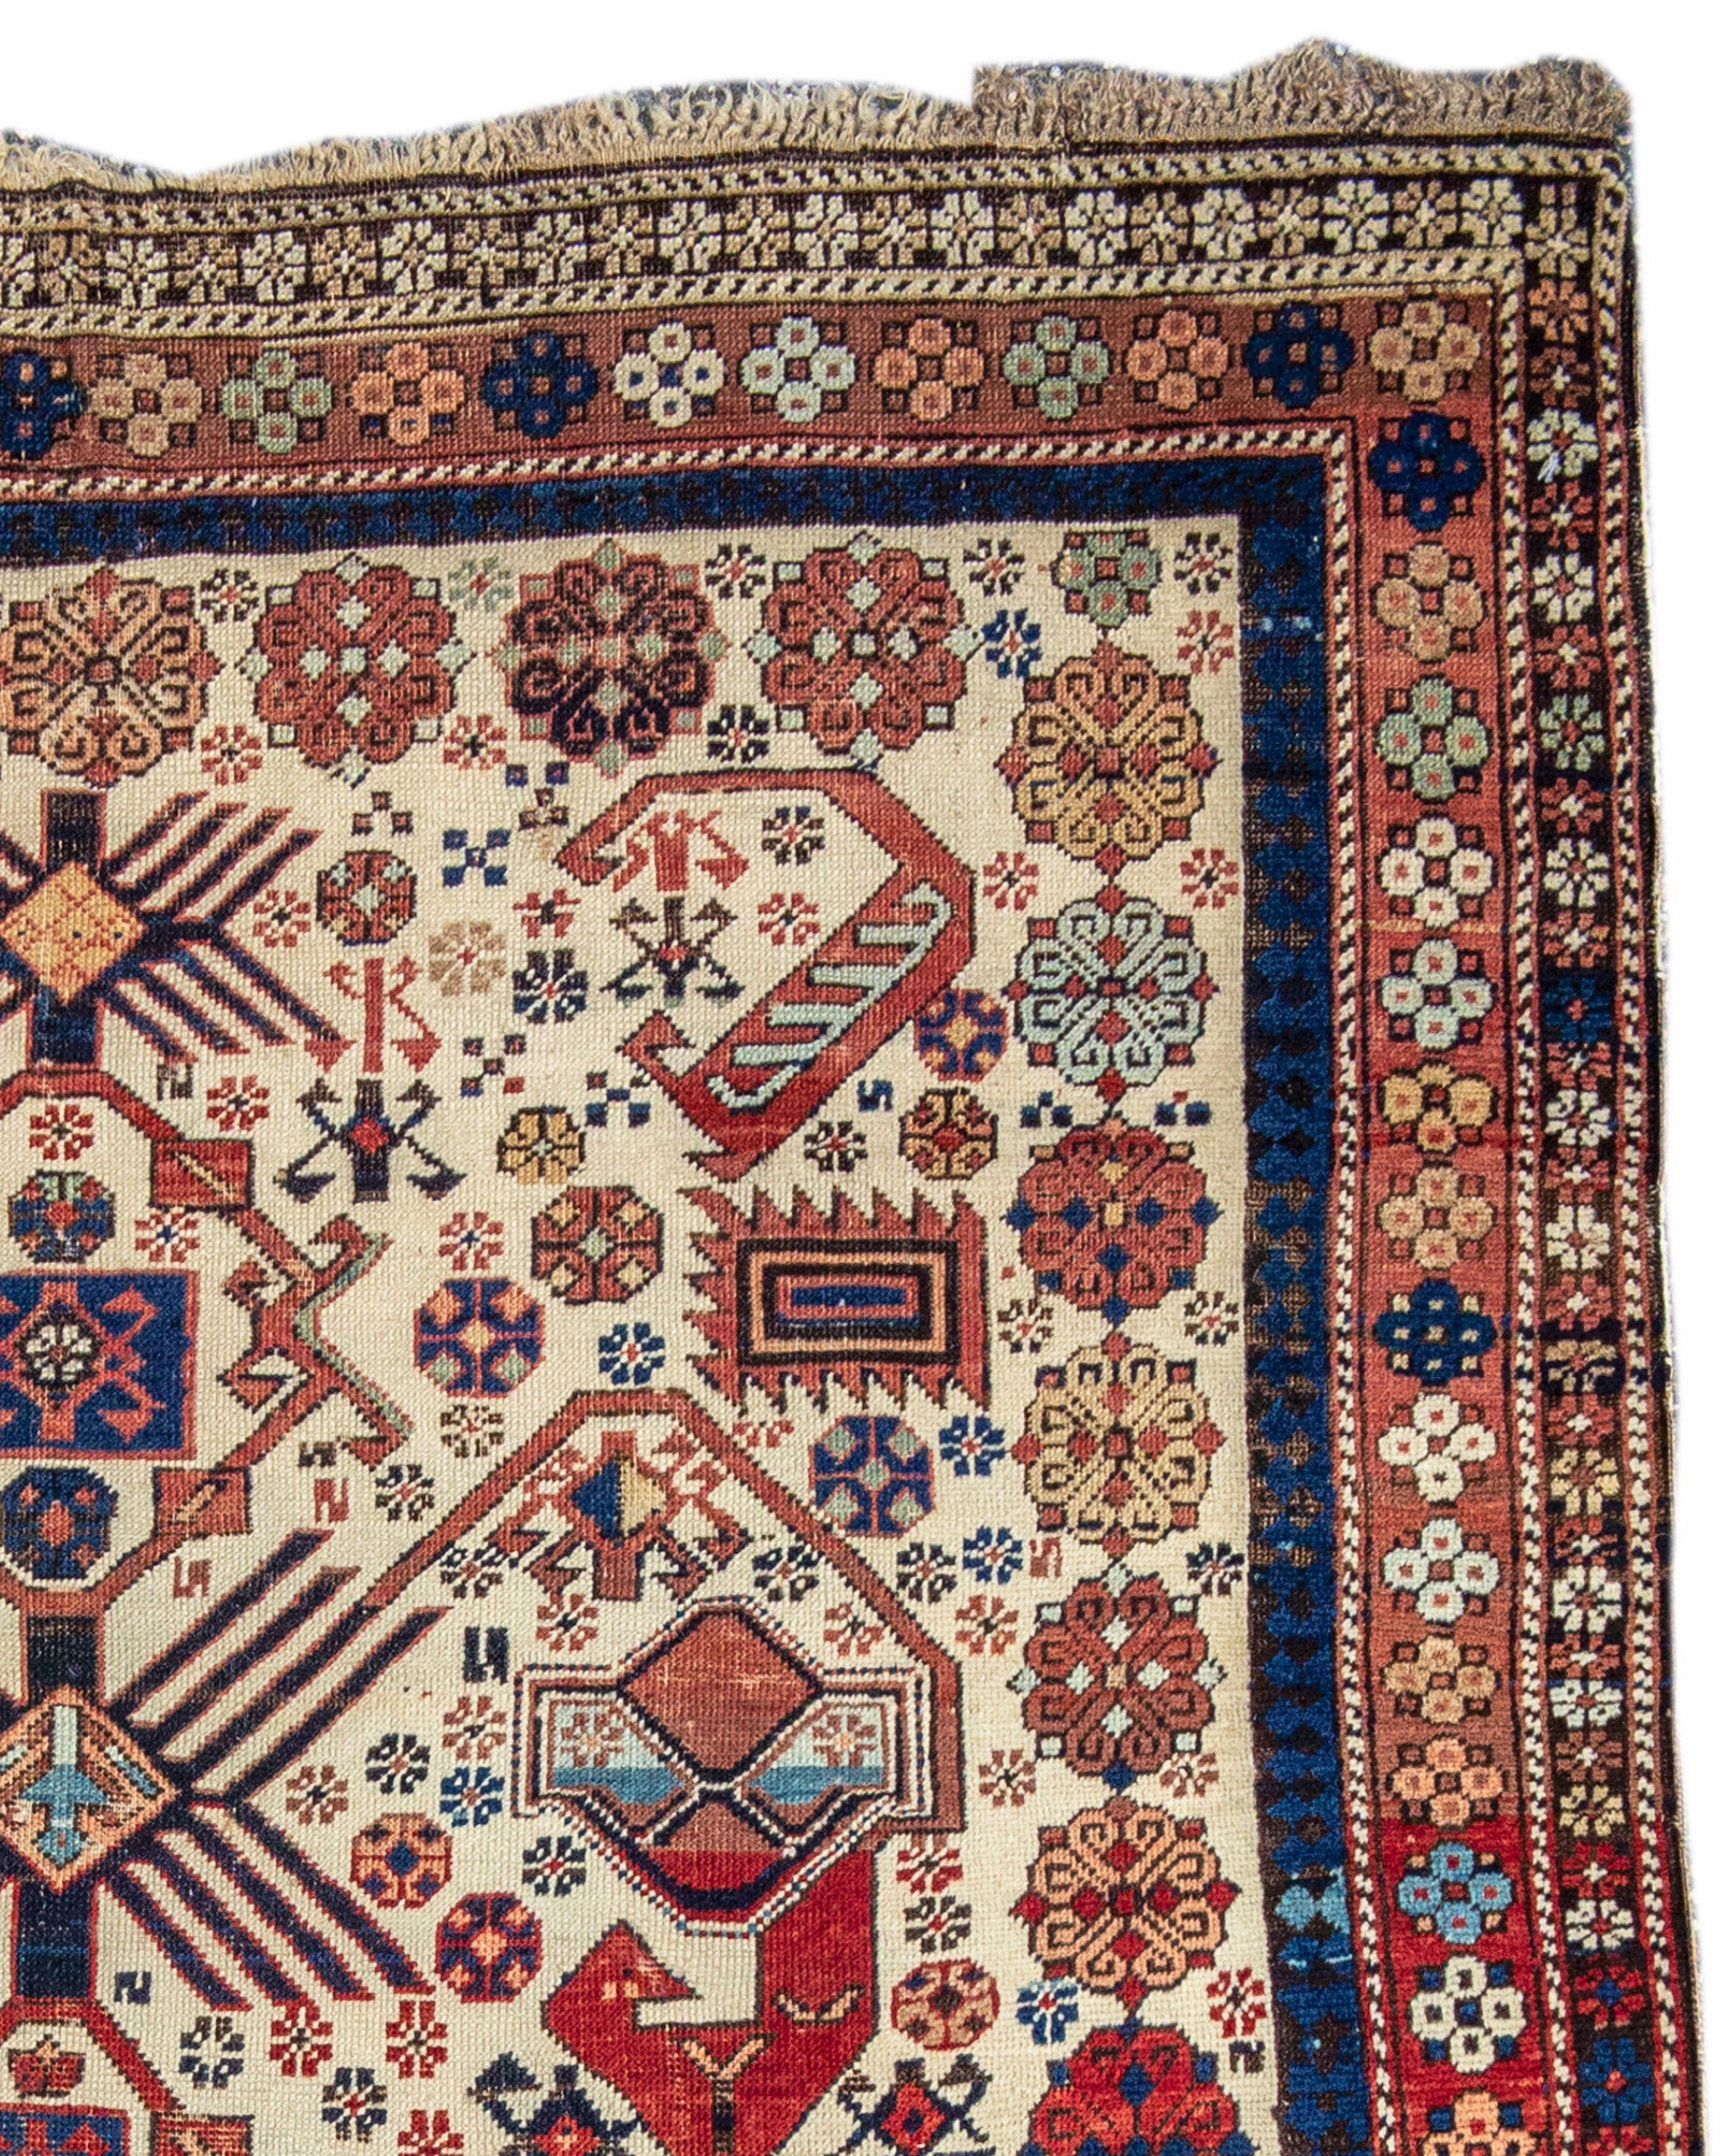 Antique Persian Shirvan Rug, Late 19th Century

Additional Information:
Dimensions: 4'0